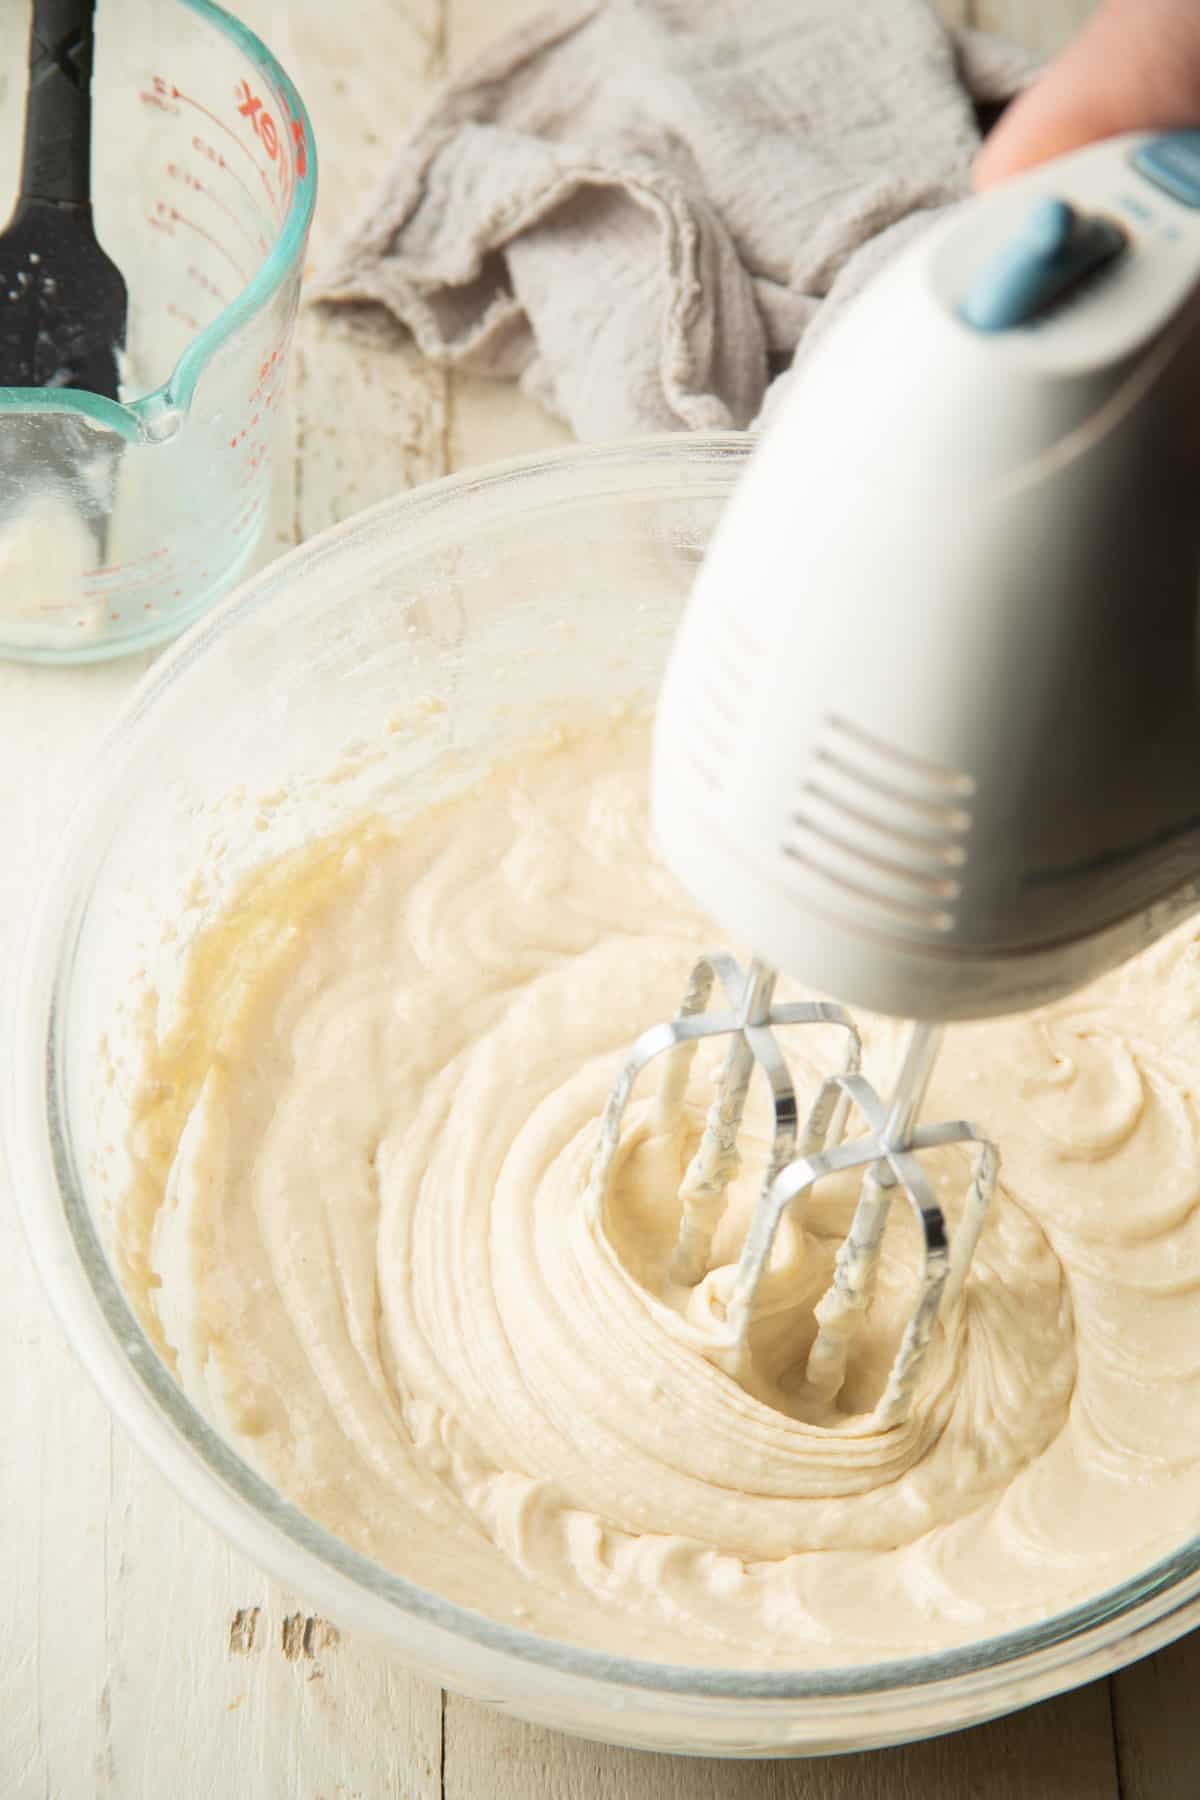 Hand mixing cake batter with an electric mixer.